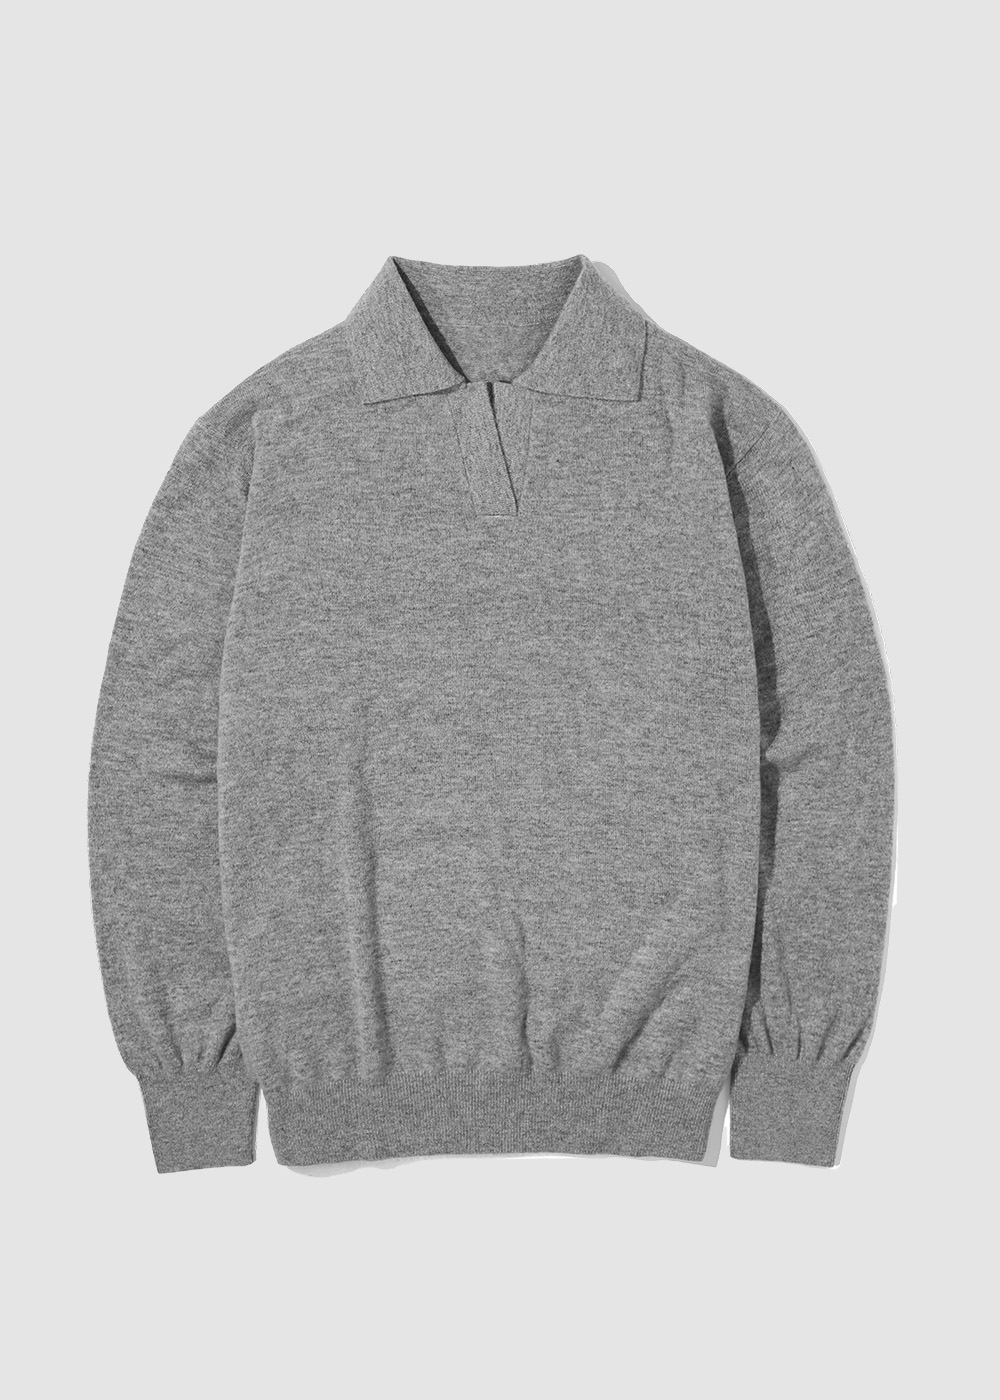 Cashmere 10% Blended Collar Knit _ gray